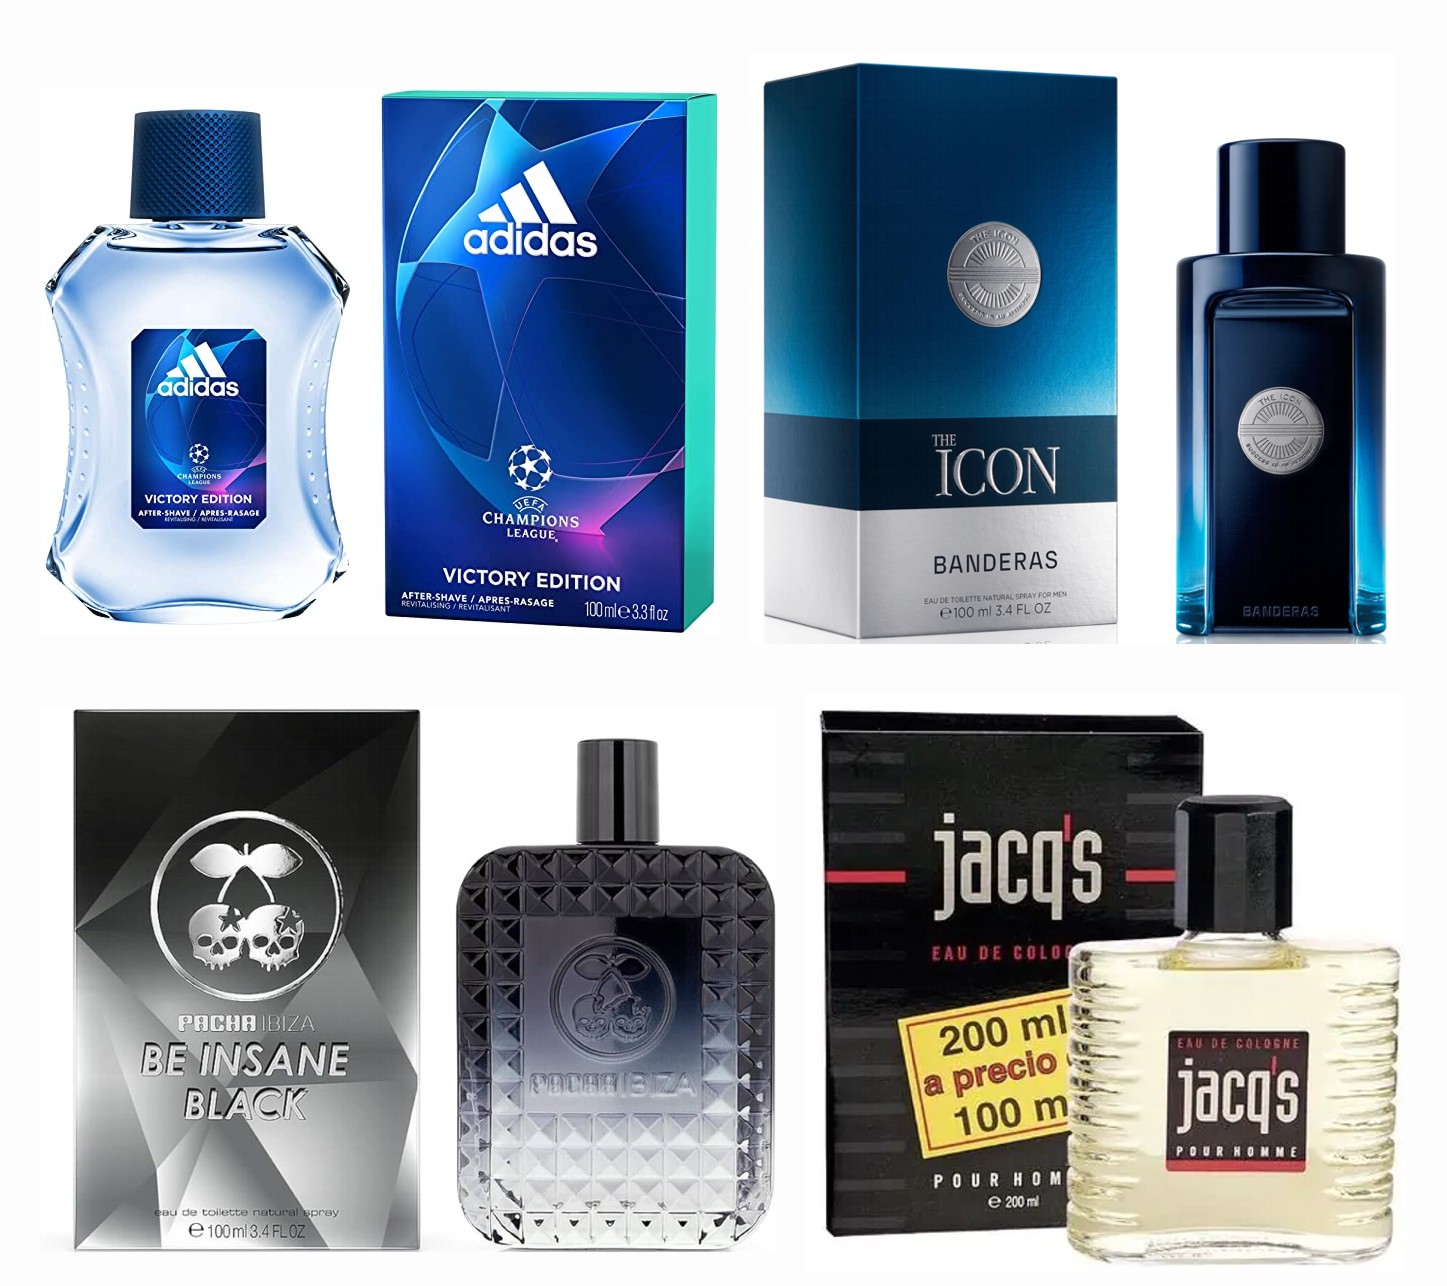 LOTE 9 DE HOMBRE: ADIDAS VICTORY EDT 100 ML TESTER + ANTONIO BANDERAS THE ICON EDT 100 ML TESTER + PACHA BE INSANE BLACK HIM 100 ML TESTER + JACQS 200 ML TESTER